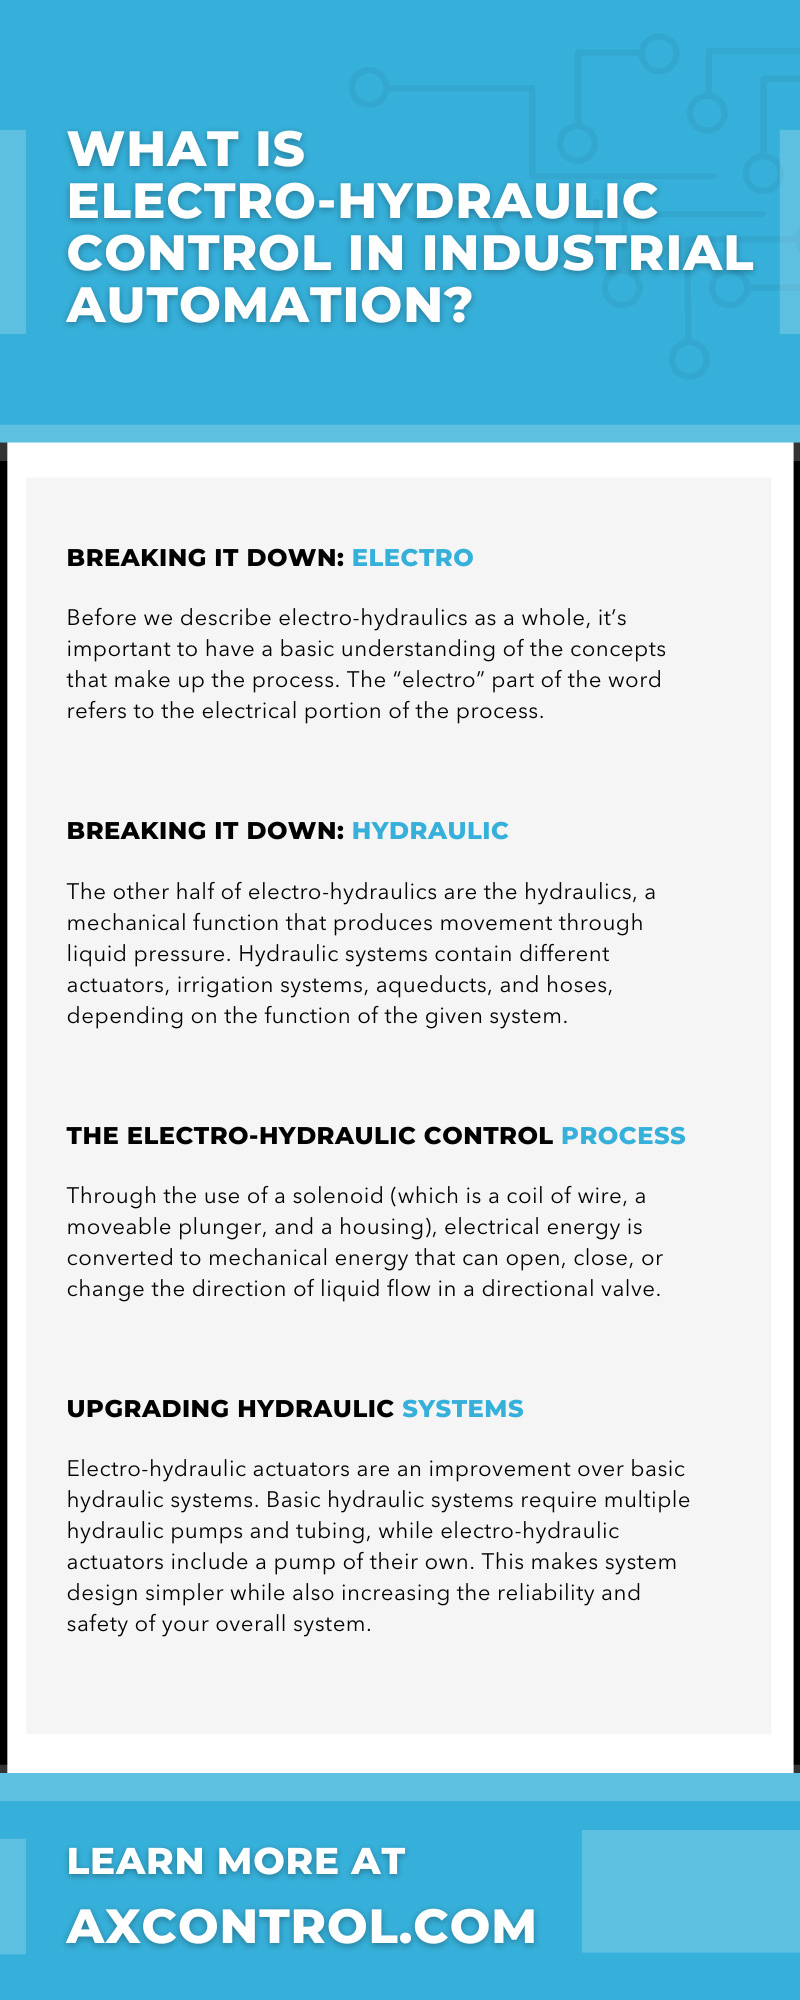 What Is Electro-Hydraulic Control in Industrial Automation?